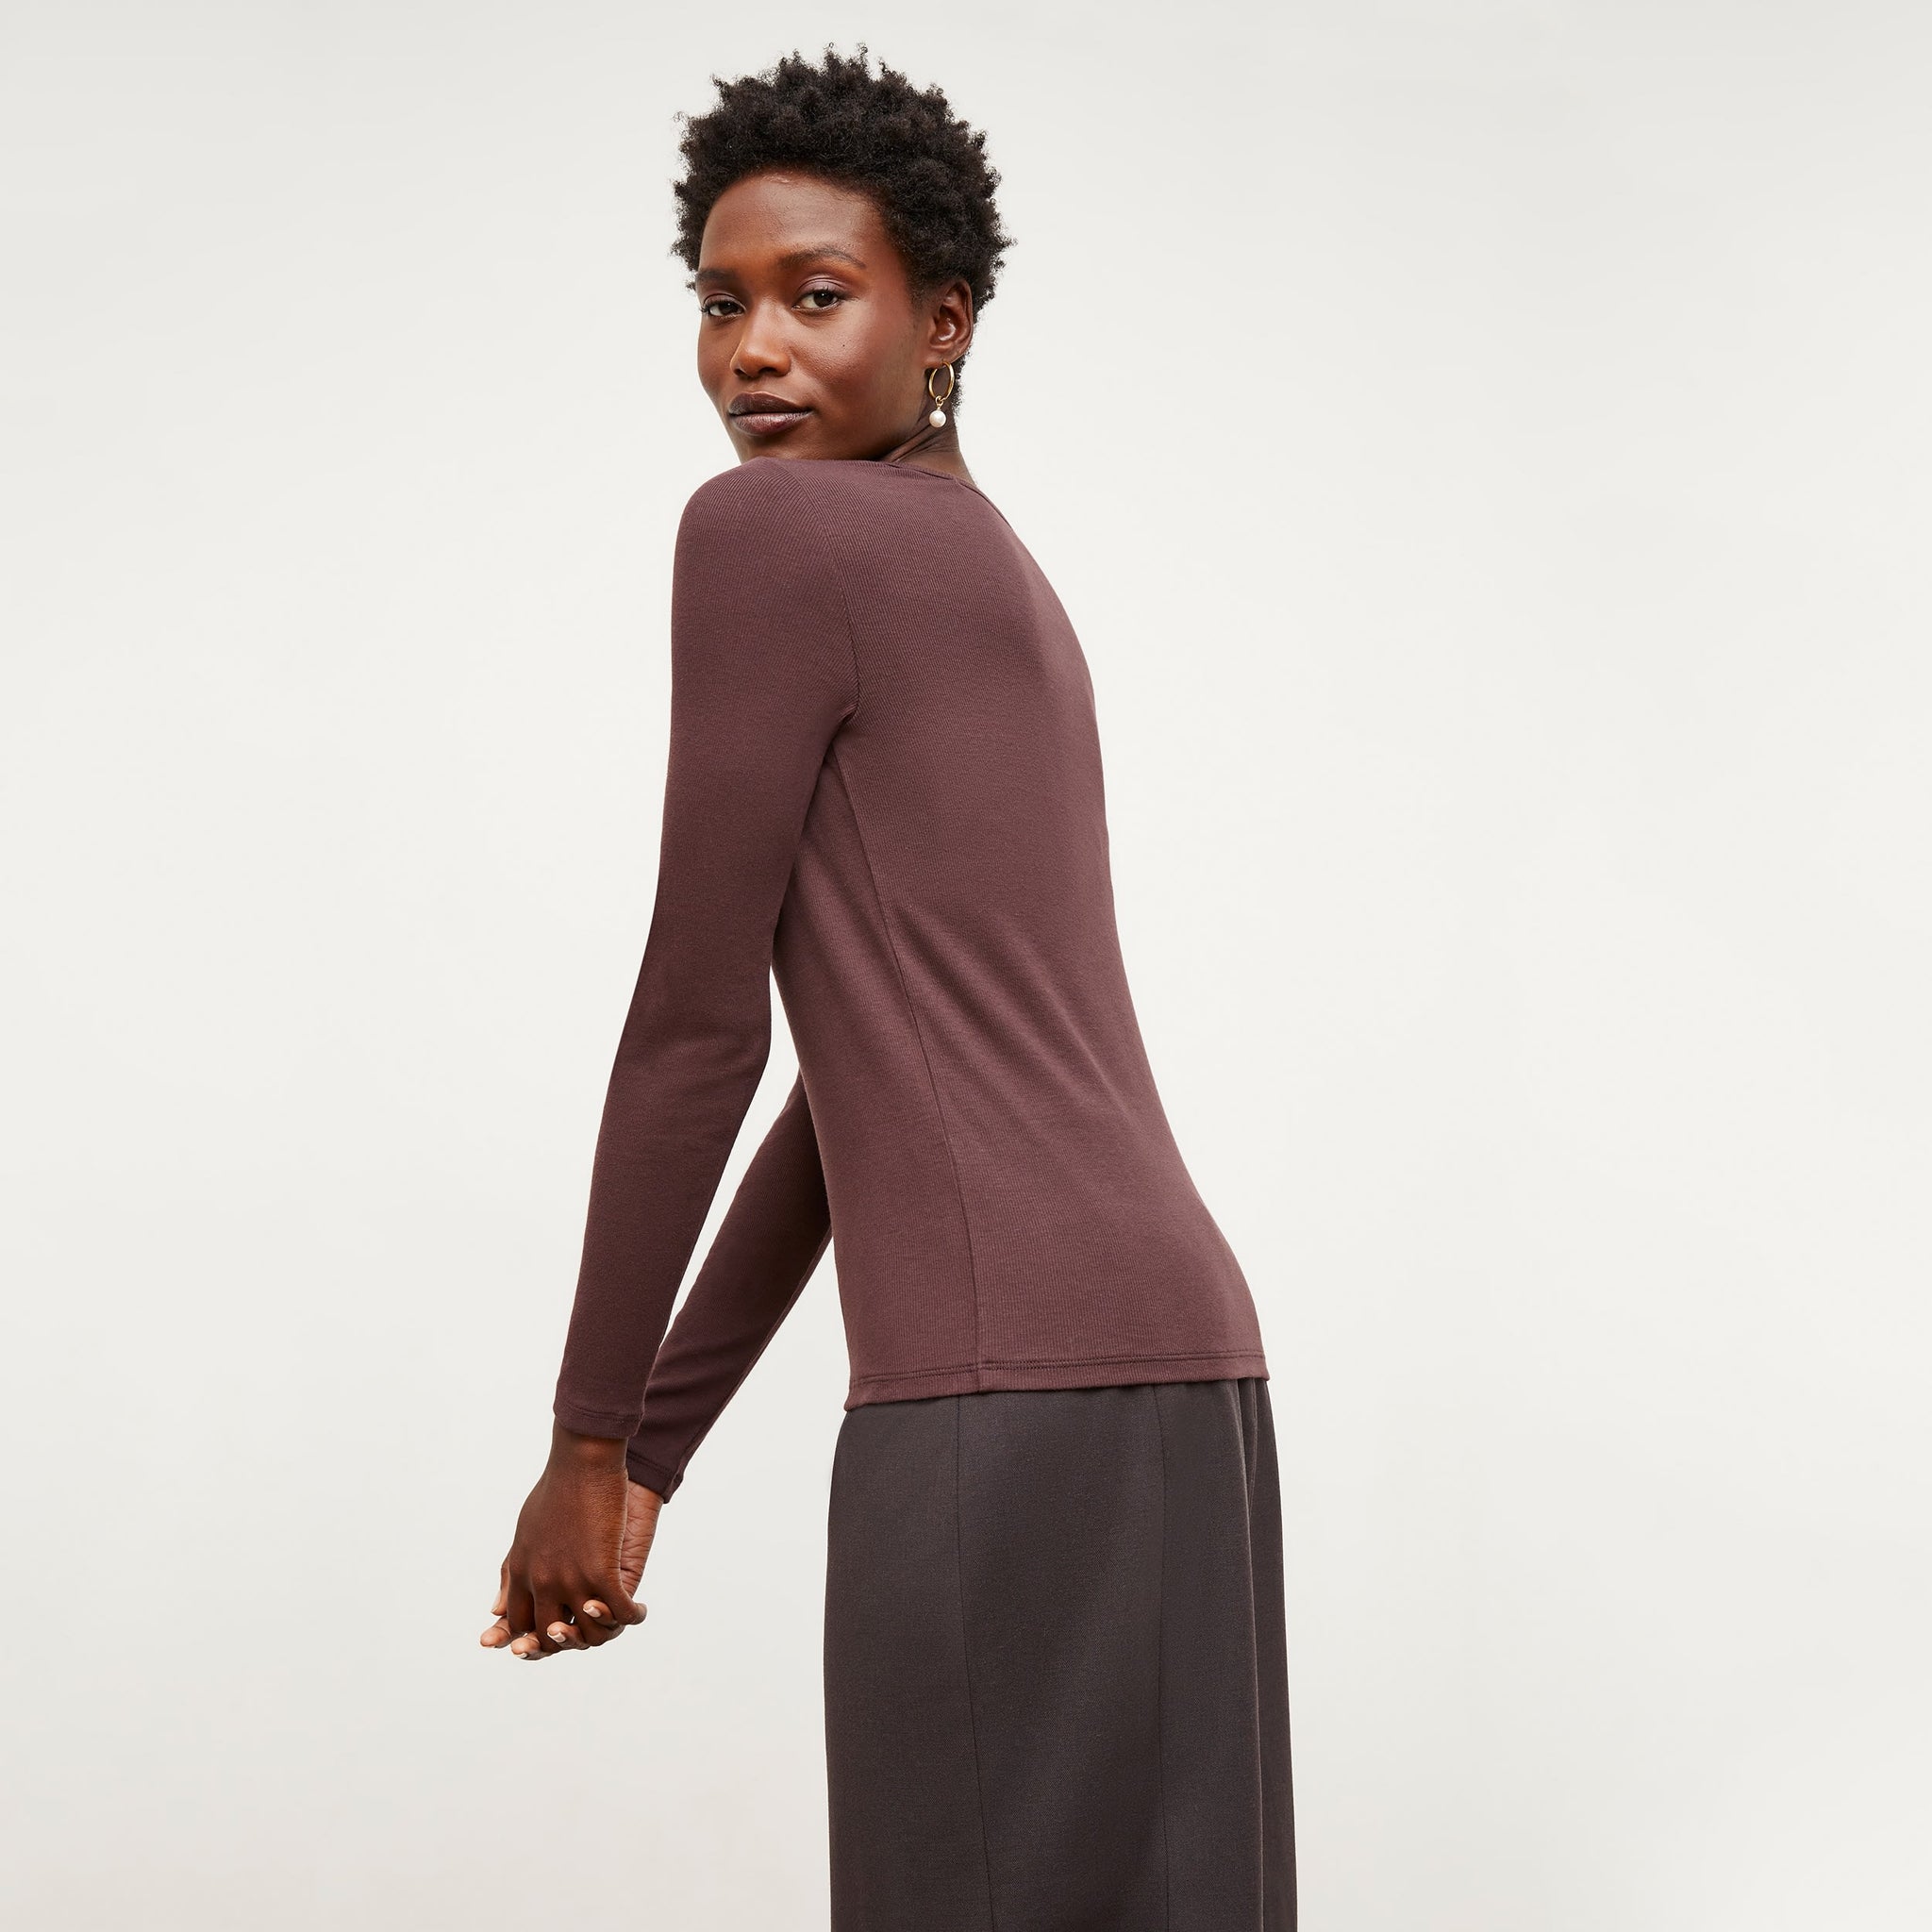 Side image of a woman standing wearing the Marcia T-Shirt--Ribbed Pima Cotton in Huckleberry